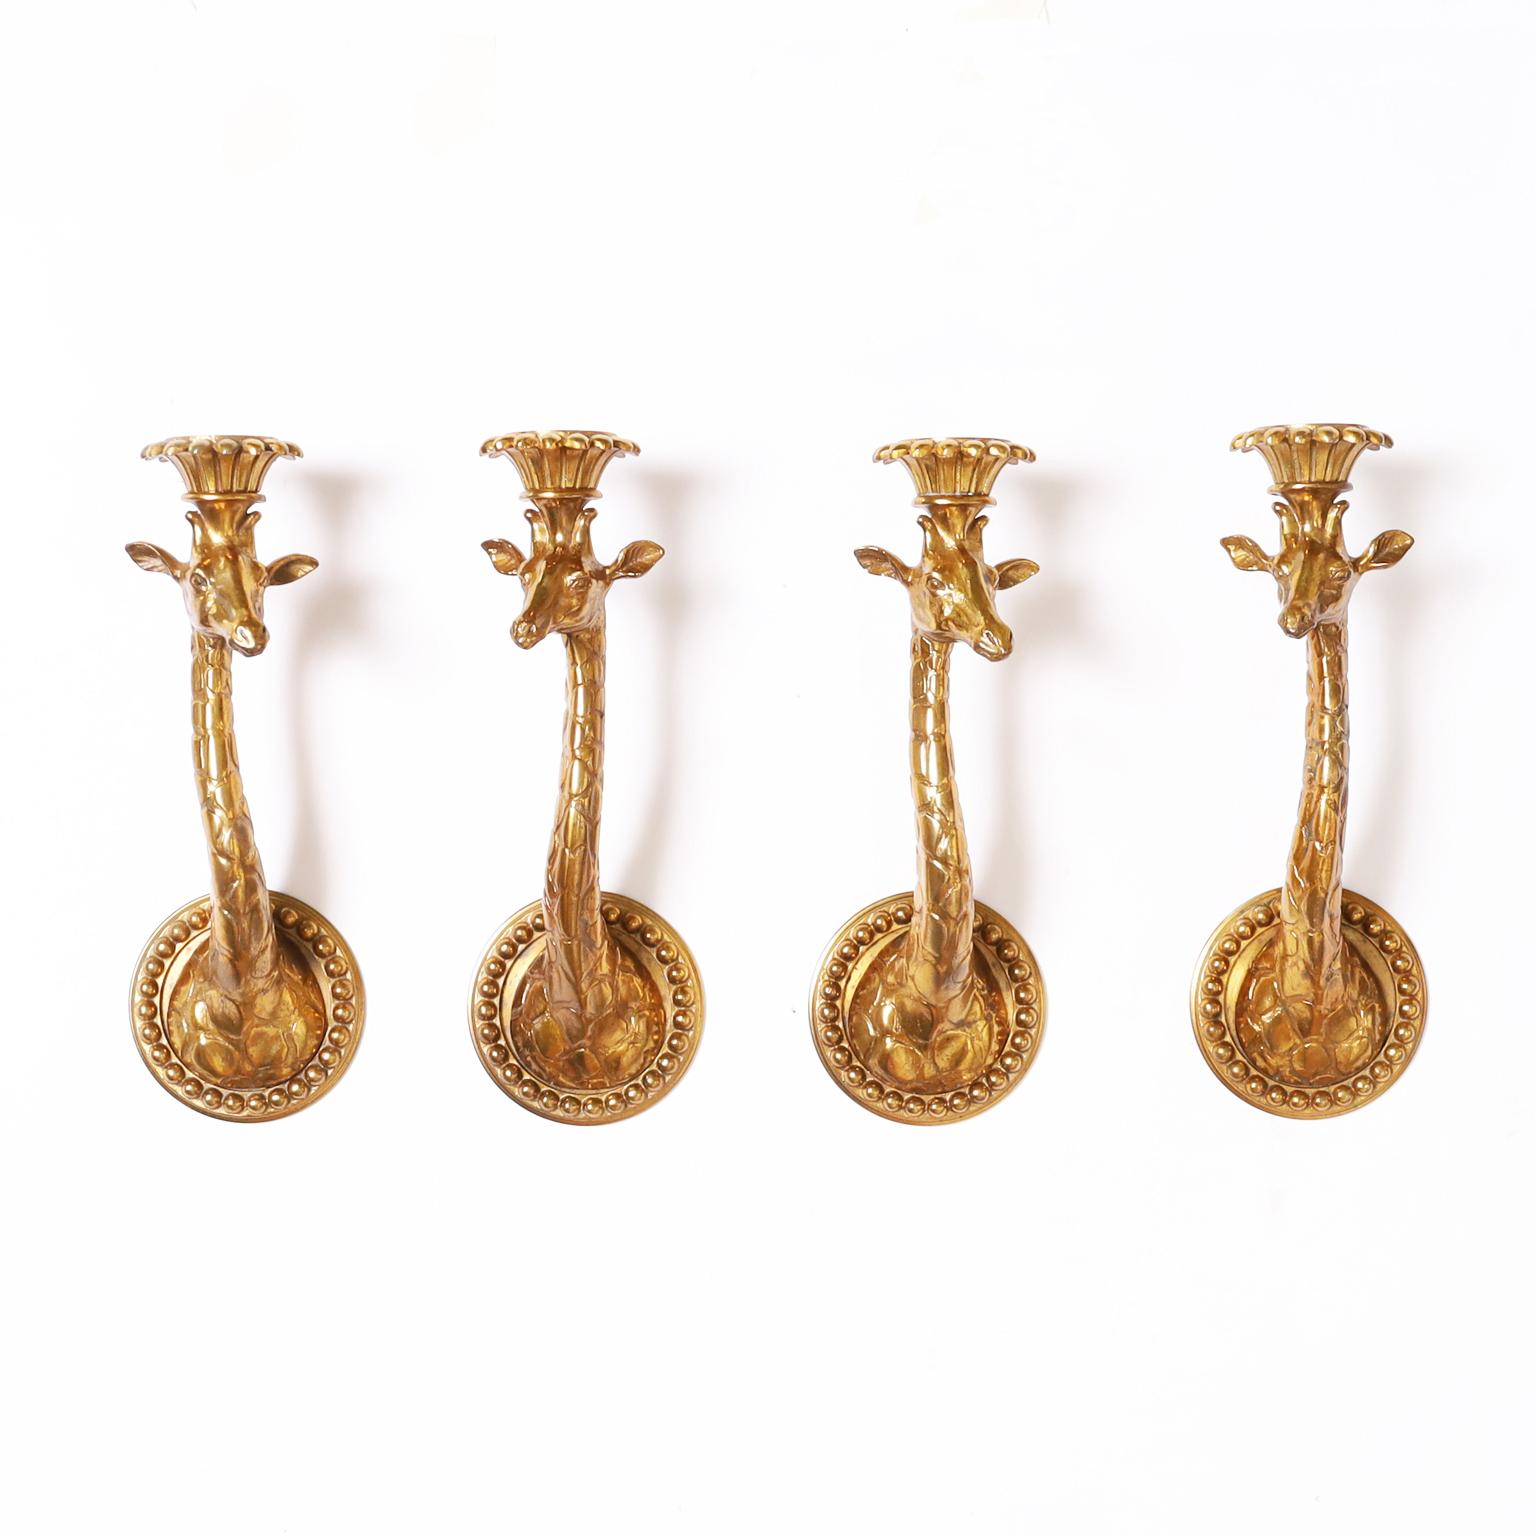 Standout set of four or two pairs of vintage Italian giraffe wall sconces crafted in bronze with a gilt finish having classical candle cups and wall backplates. Price of $3,950 is per pair.